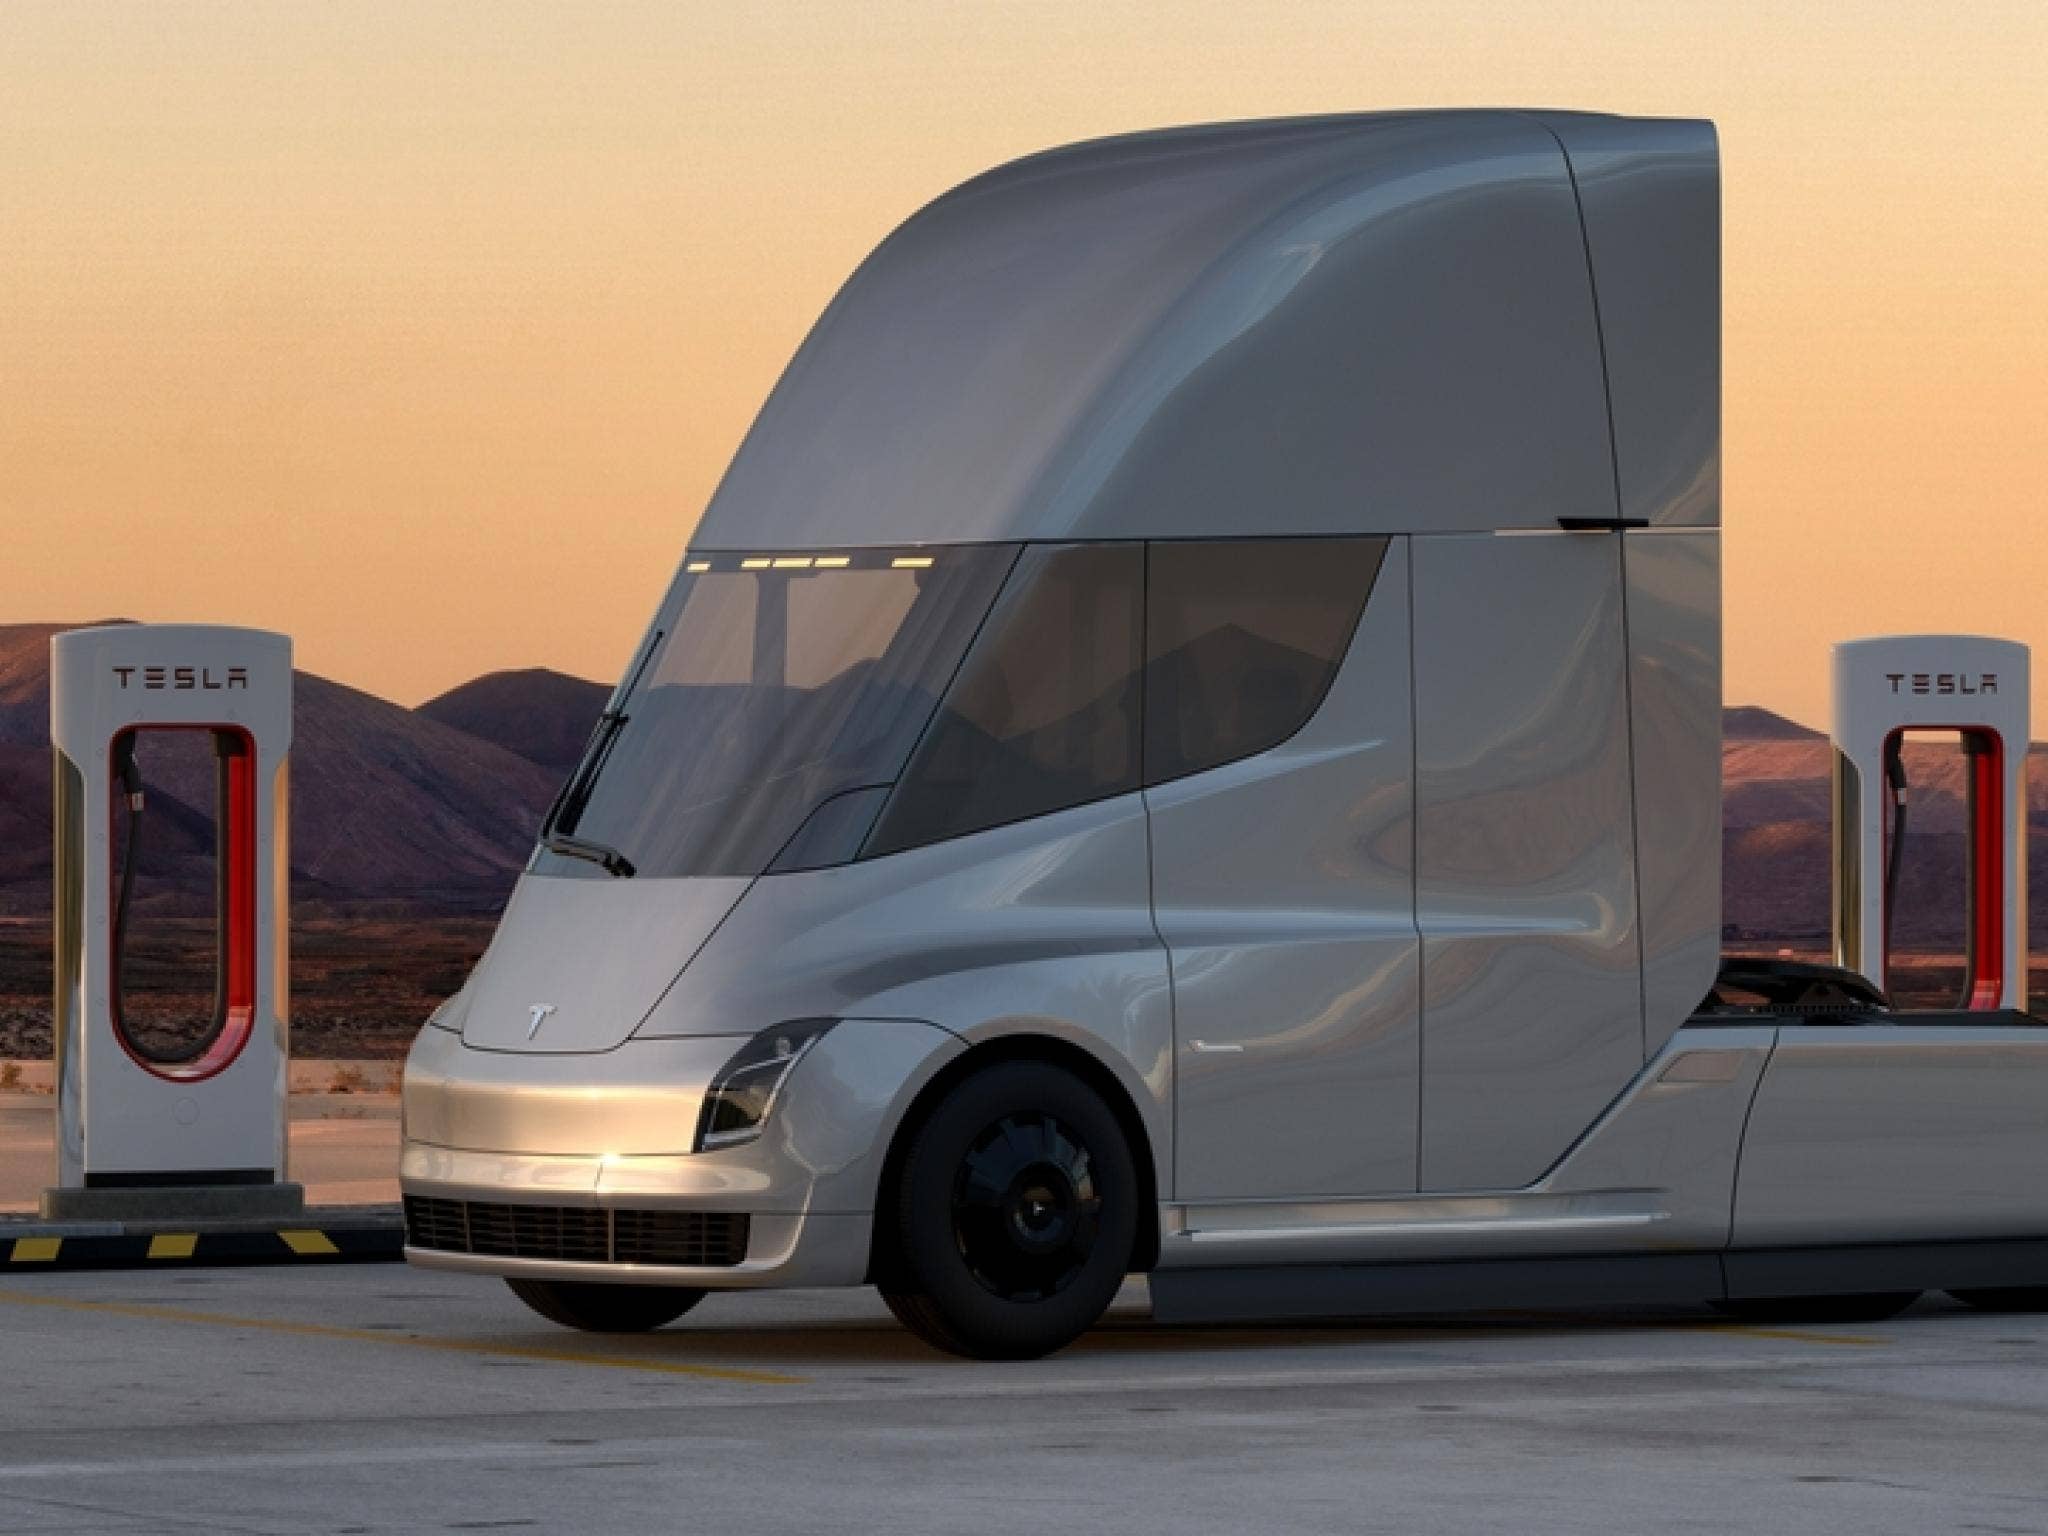 Elon Musk Says Tesla Semi 'As Easy To Drive As Model 3' At Launch Event